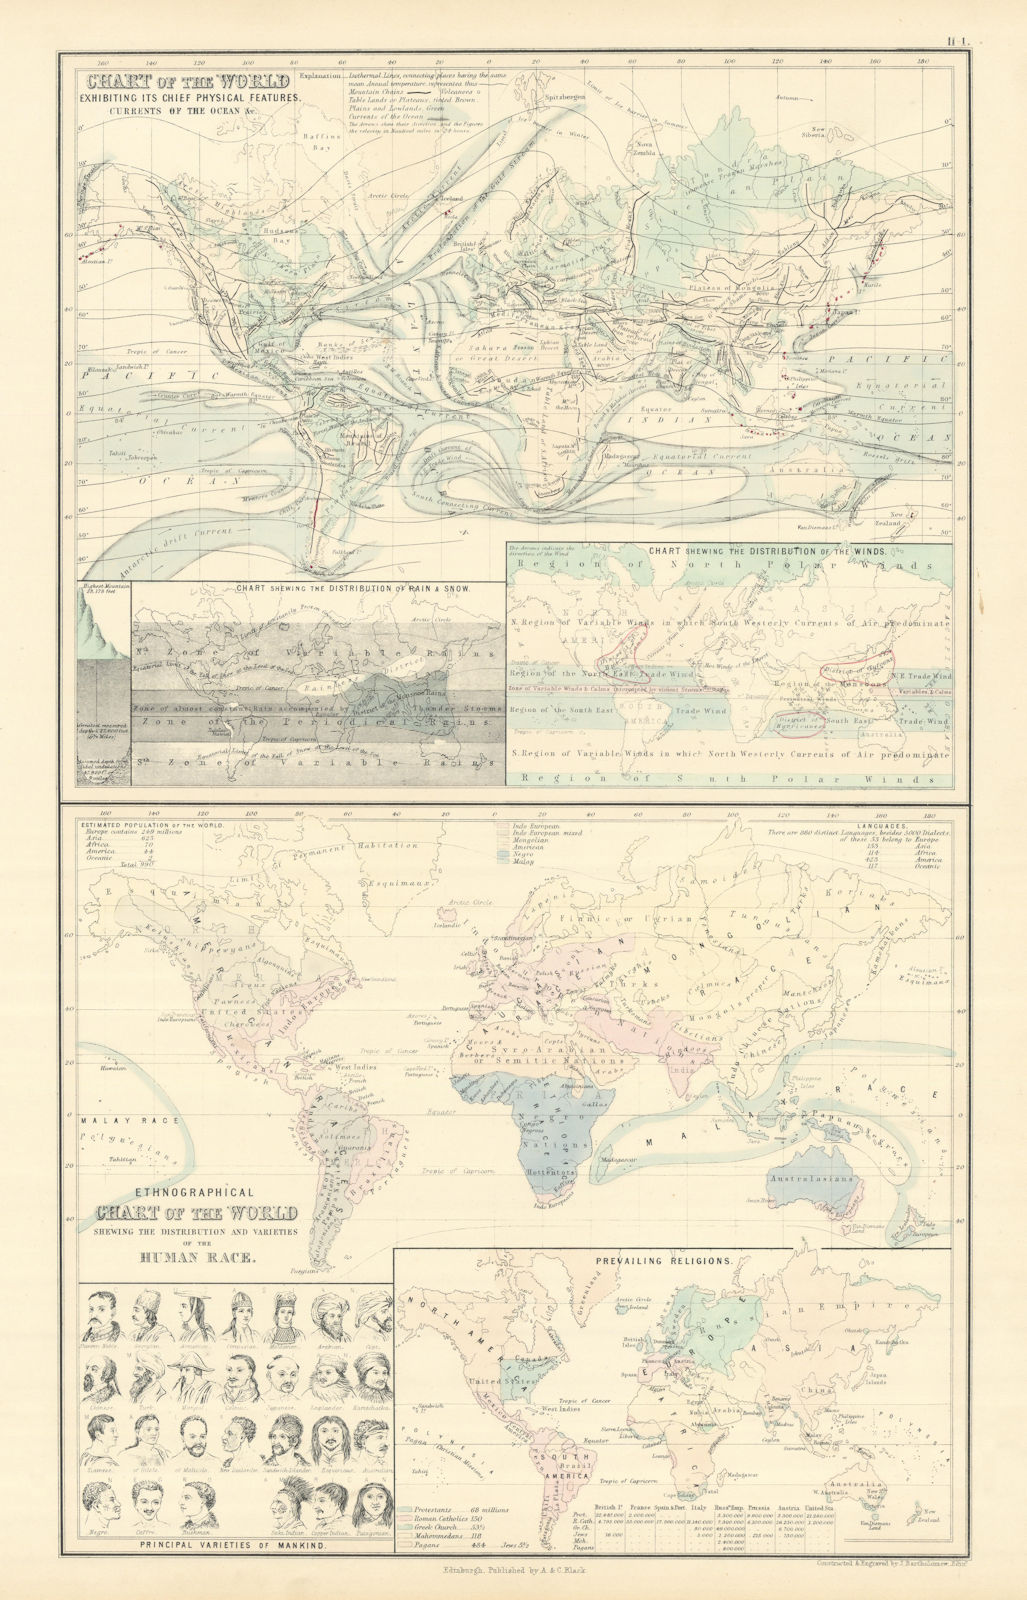 Associate Product World physical features ocean currents ethnographical religions 1854 old map